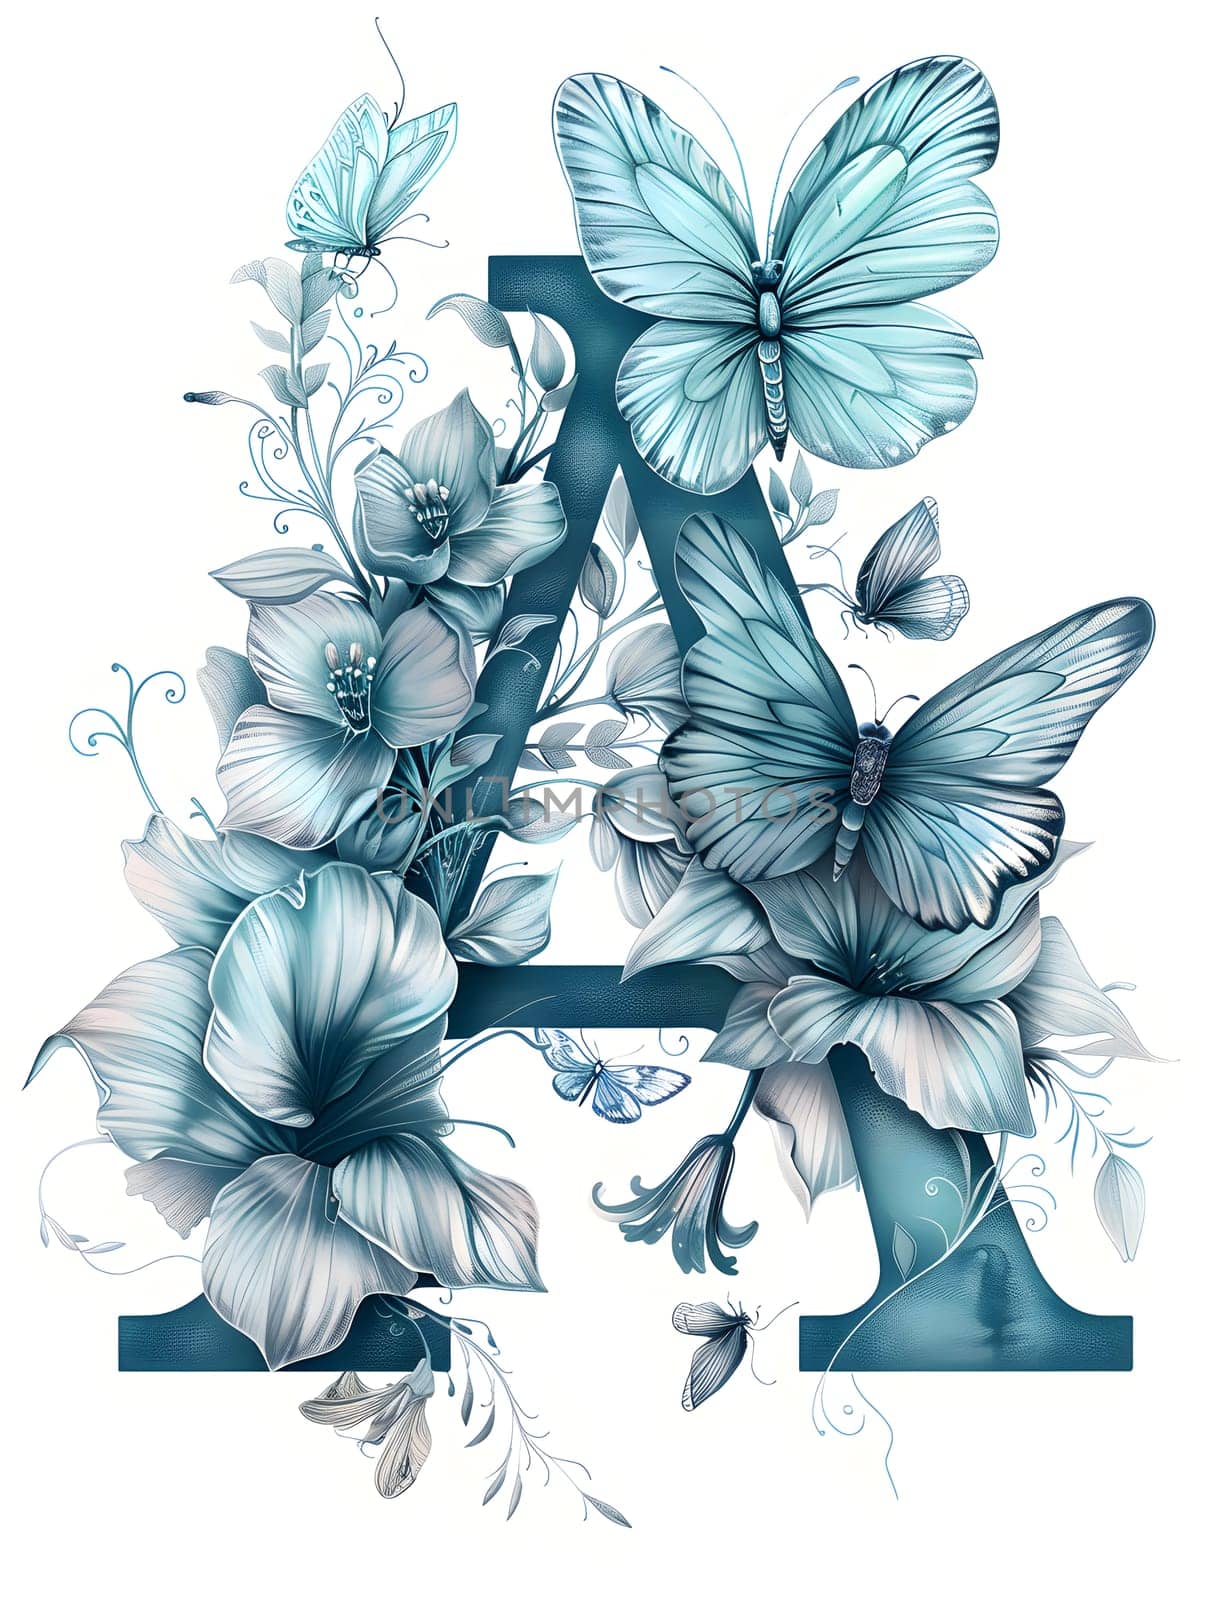 The letter a is adorned with artistic blue flower and butterfly illustrations by Nadtochiy